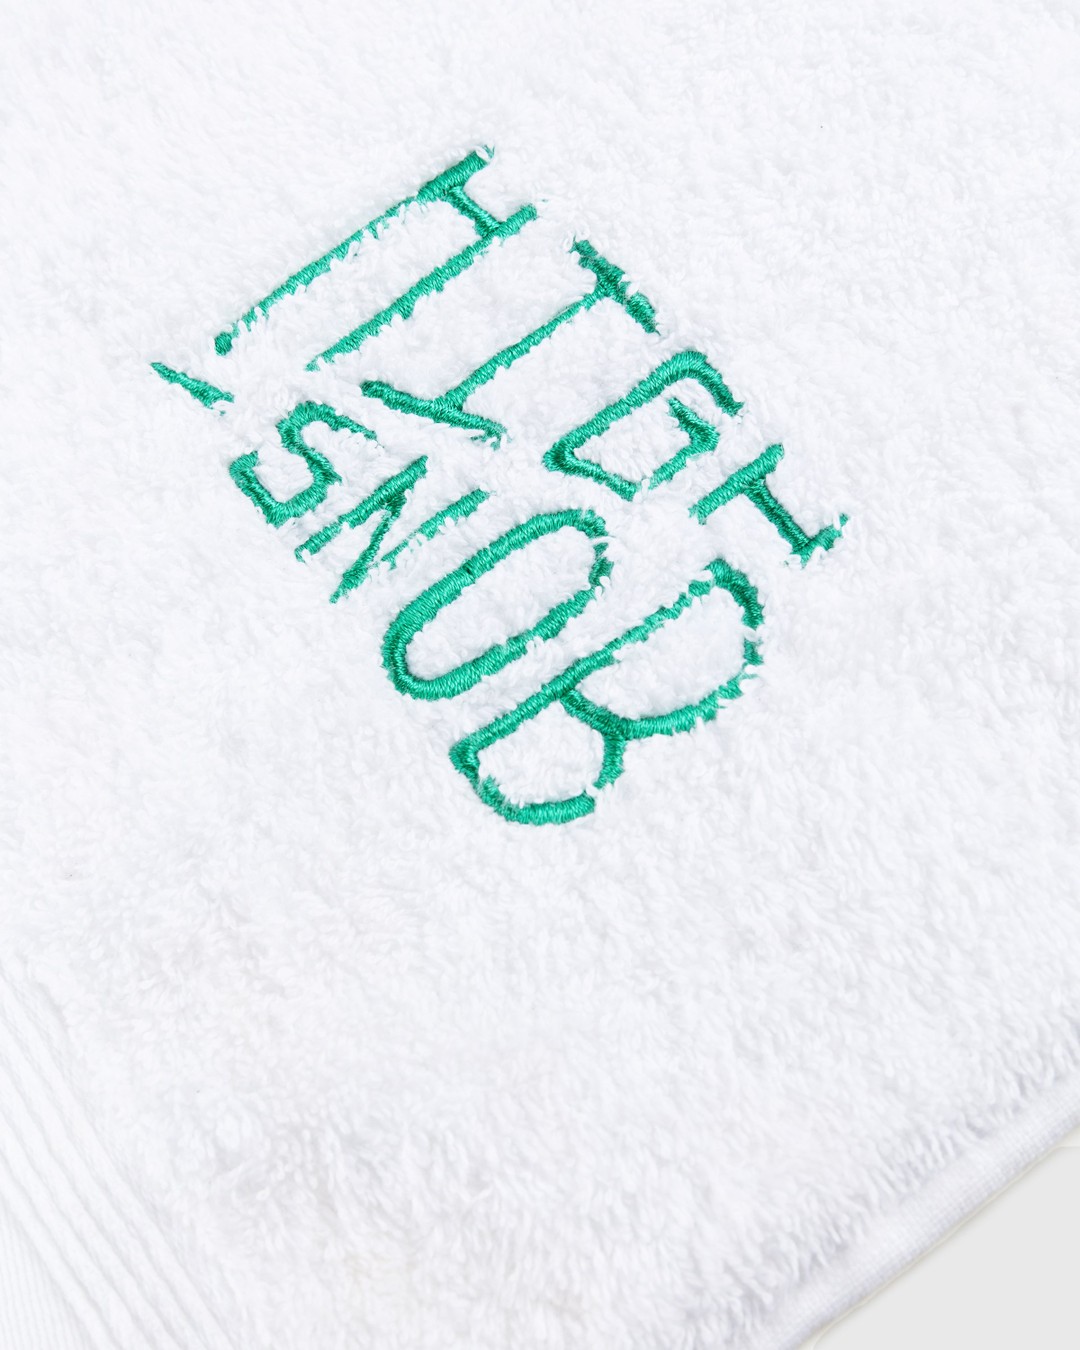 Hotel Amour x Highsnobiety – Not In Paris 4 Towel White - Towels - White - Image 4